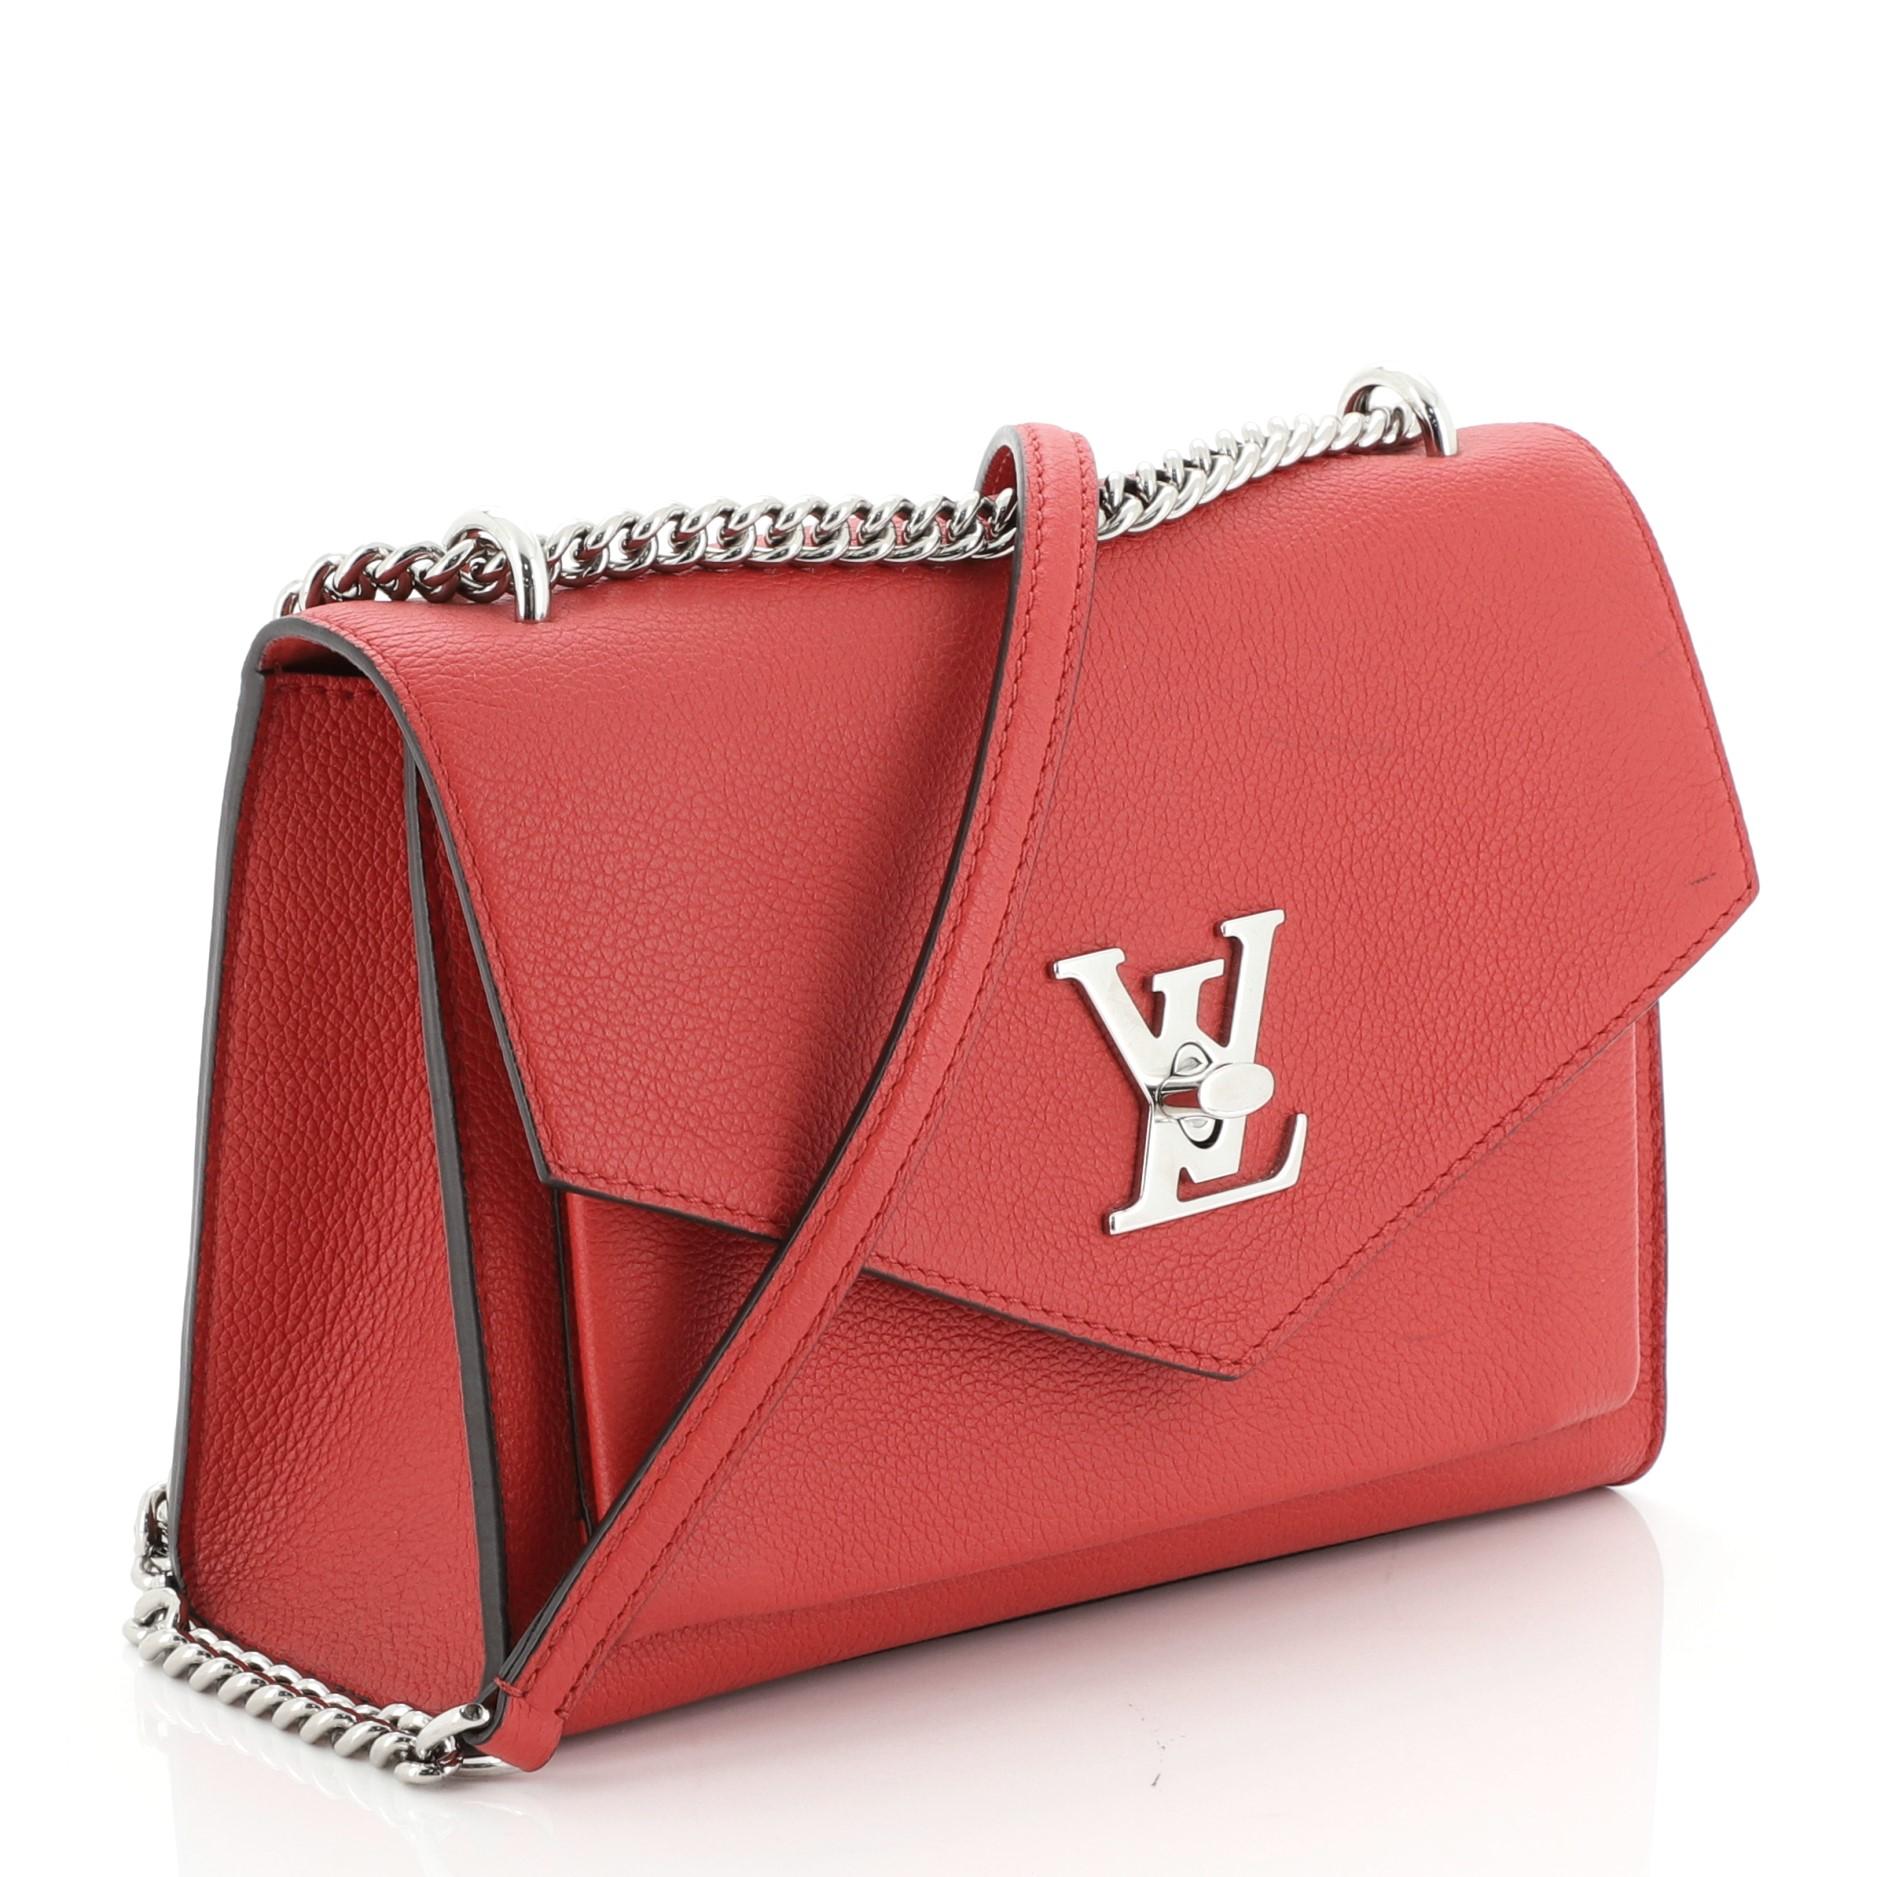 This Louis Vuitton Mylockme Handbag Leather BB, crafted in red leather, features chain link strap with leather pad, exterior back zip pocket, slip pocket under flap, and silver-tone hardware. Its LV twist-lock closure opens to a red microfiber